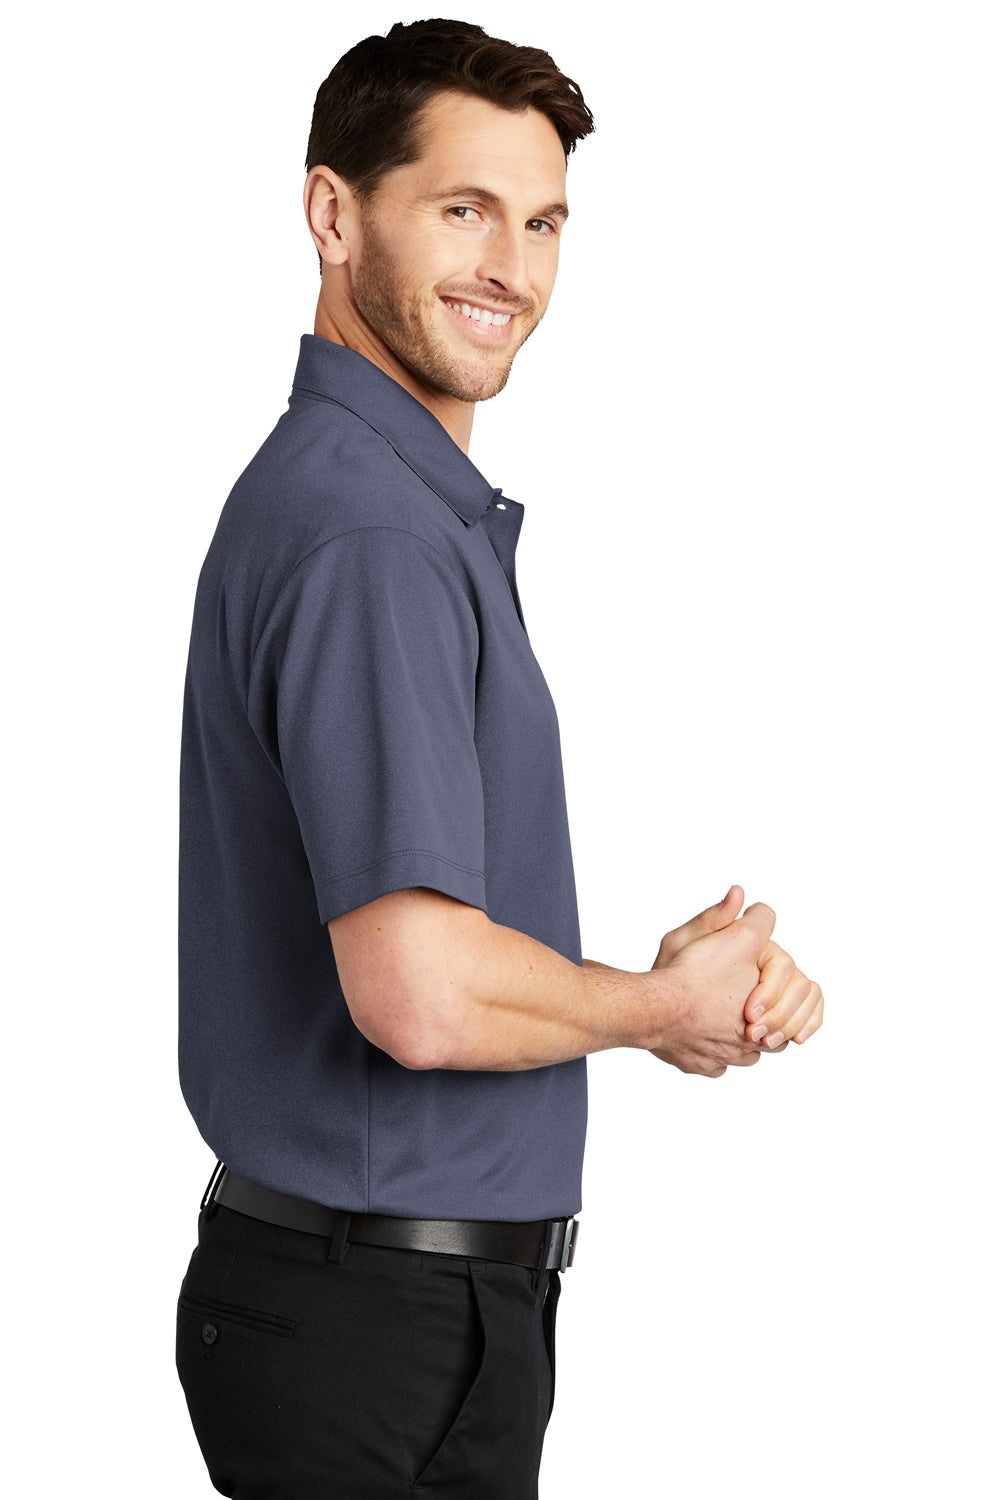 Port Authority Mens Performance Silk Touch Short Sleeve Polo Shirt Heather Navy Blue Side